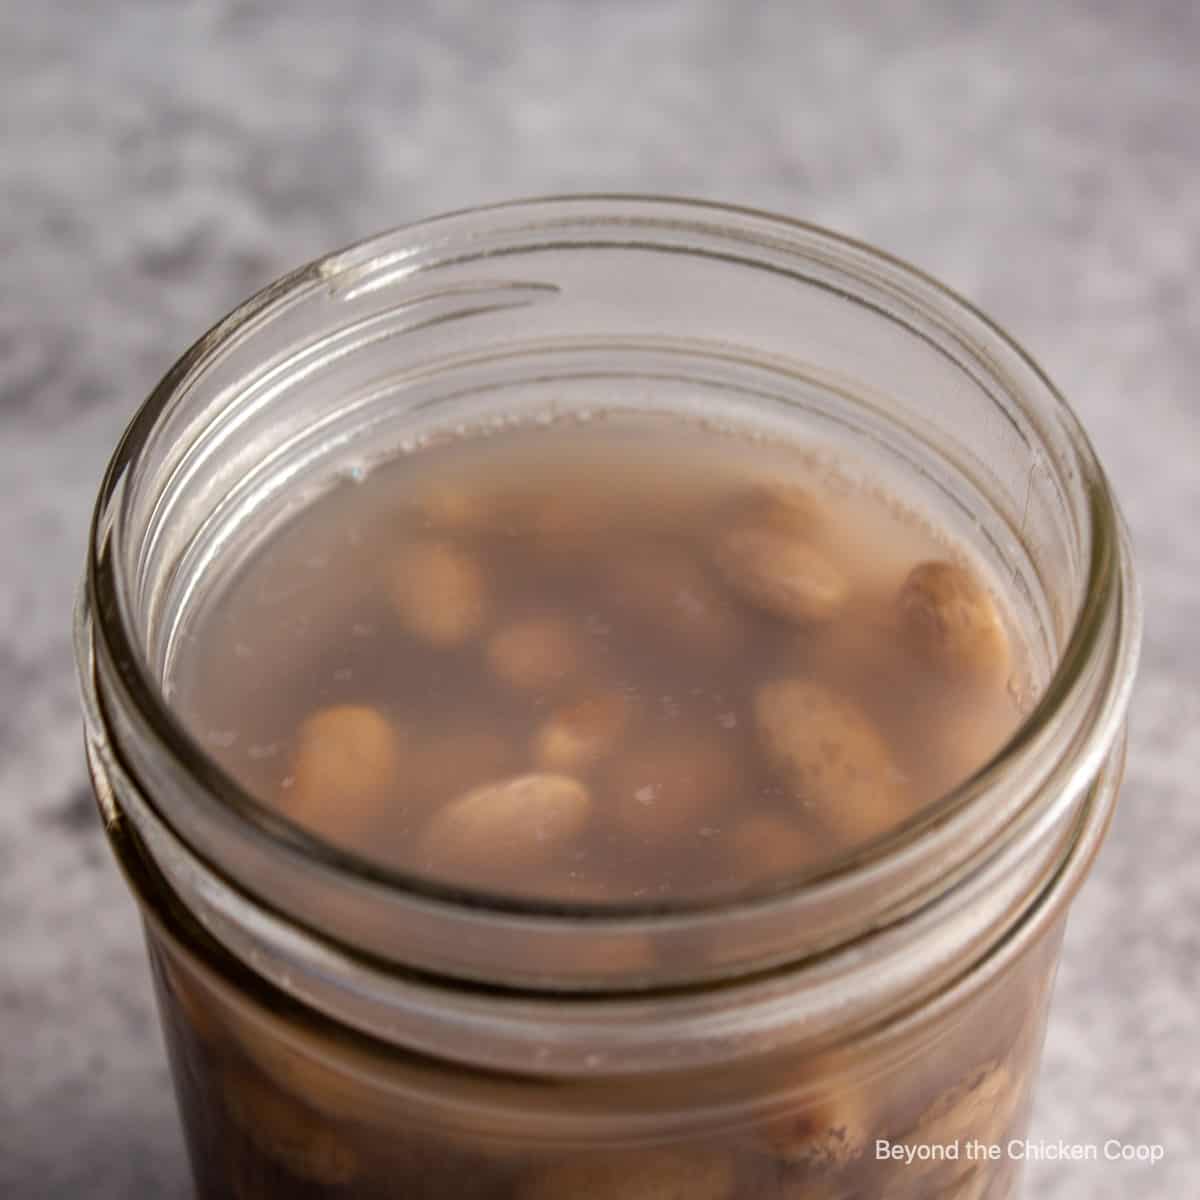 Cooking liquid over beans in a jar.